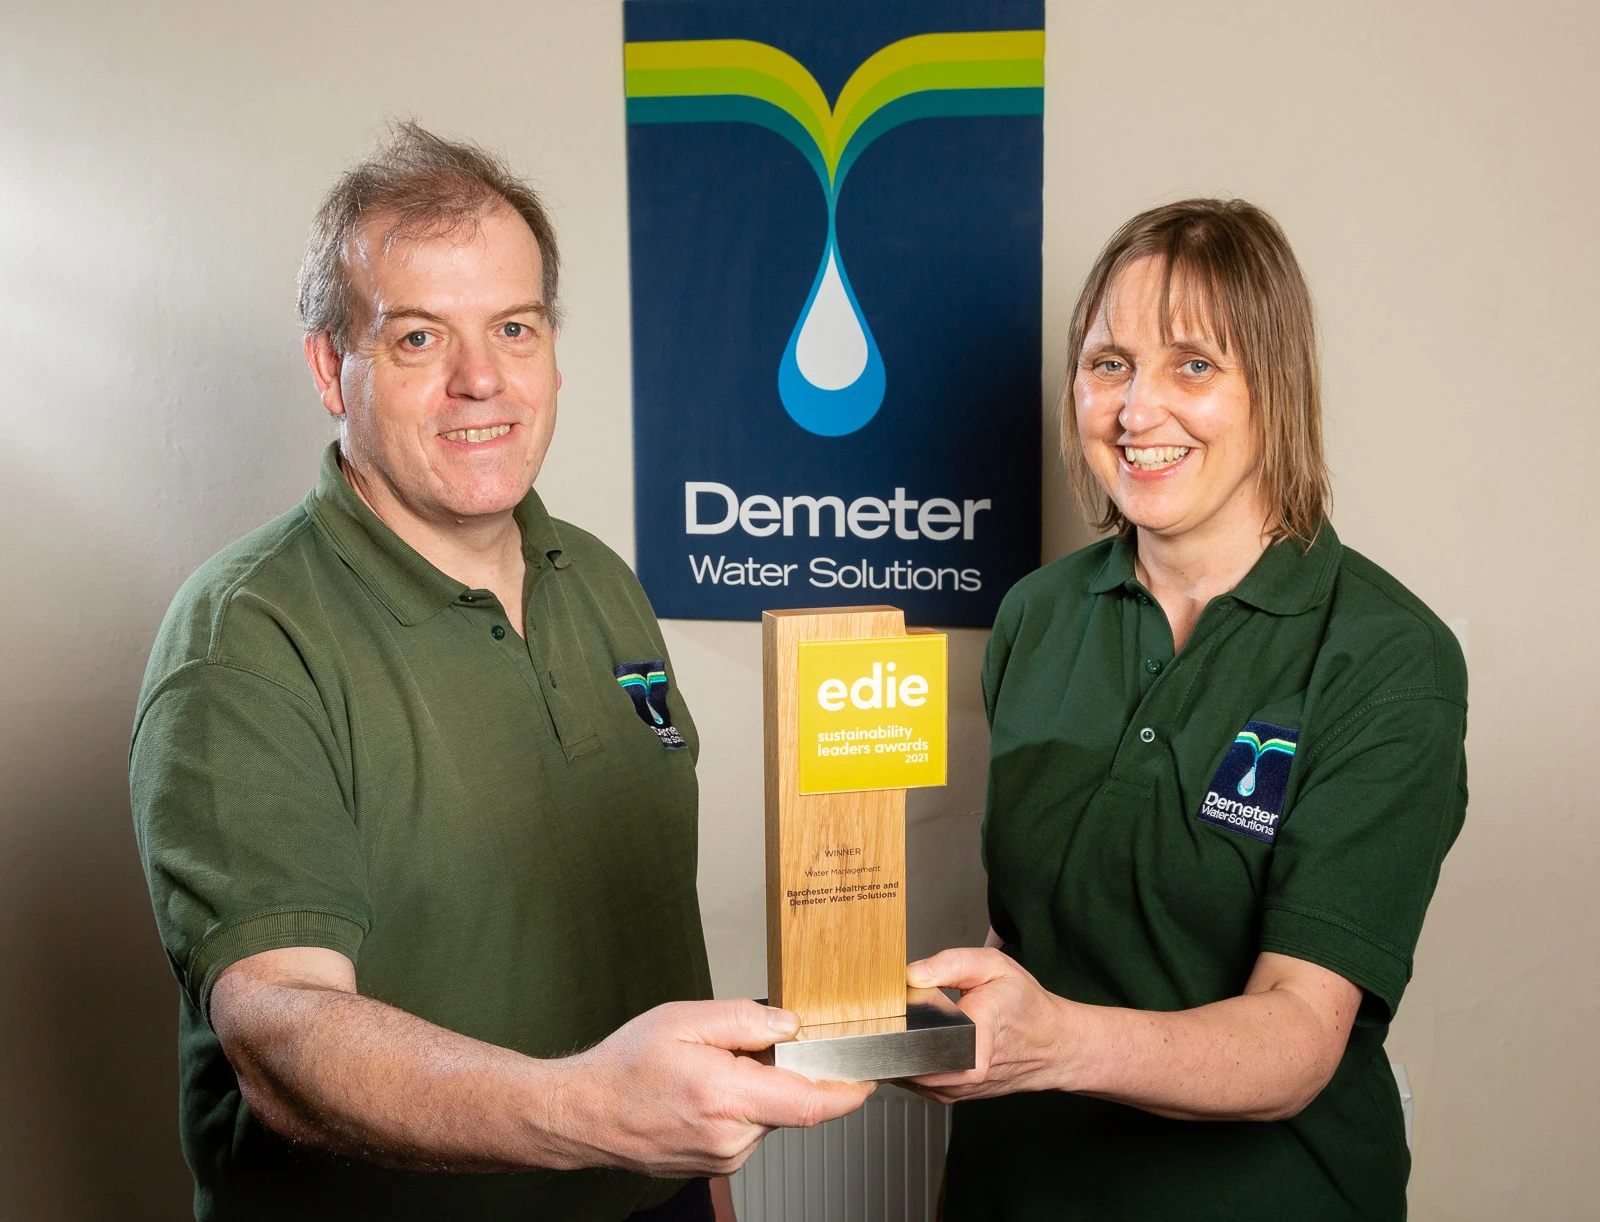 Award win for Demeter Water Solutions